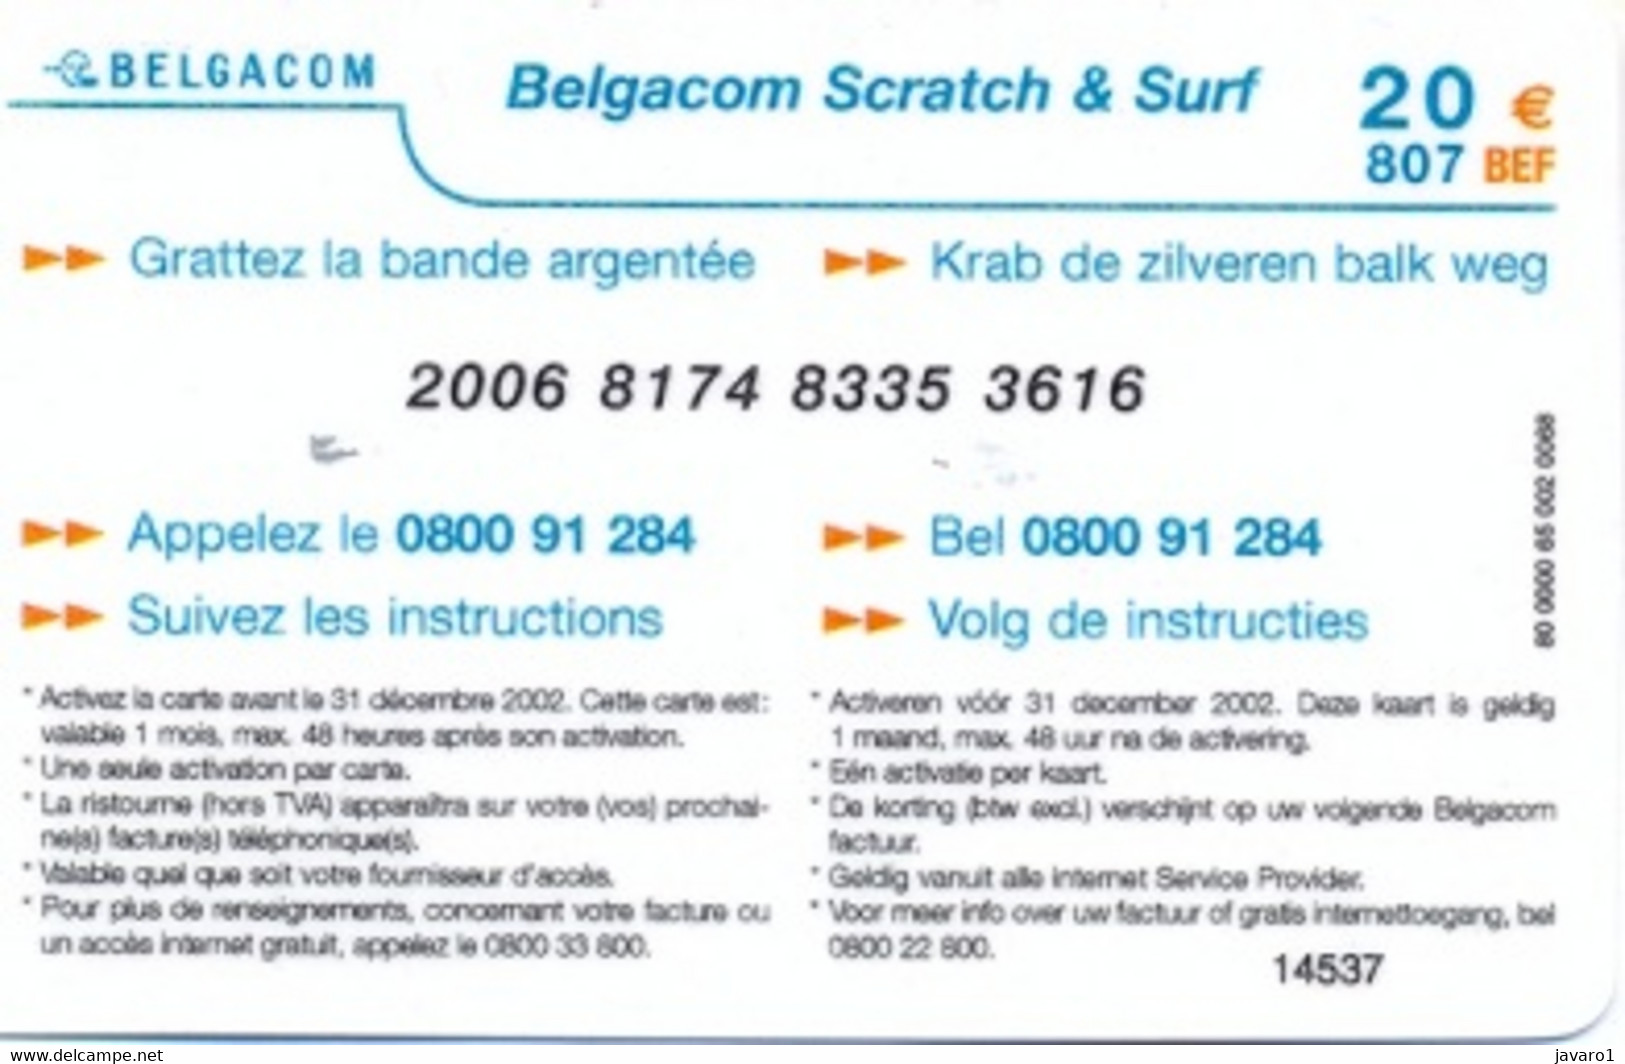 BEL_SURF : BSCR17 20eur/807BEF Carrefour USED Exp: 31/DEC/2002 - To Identify